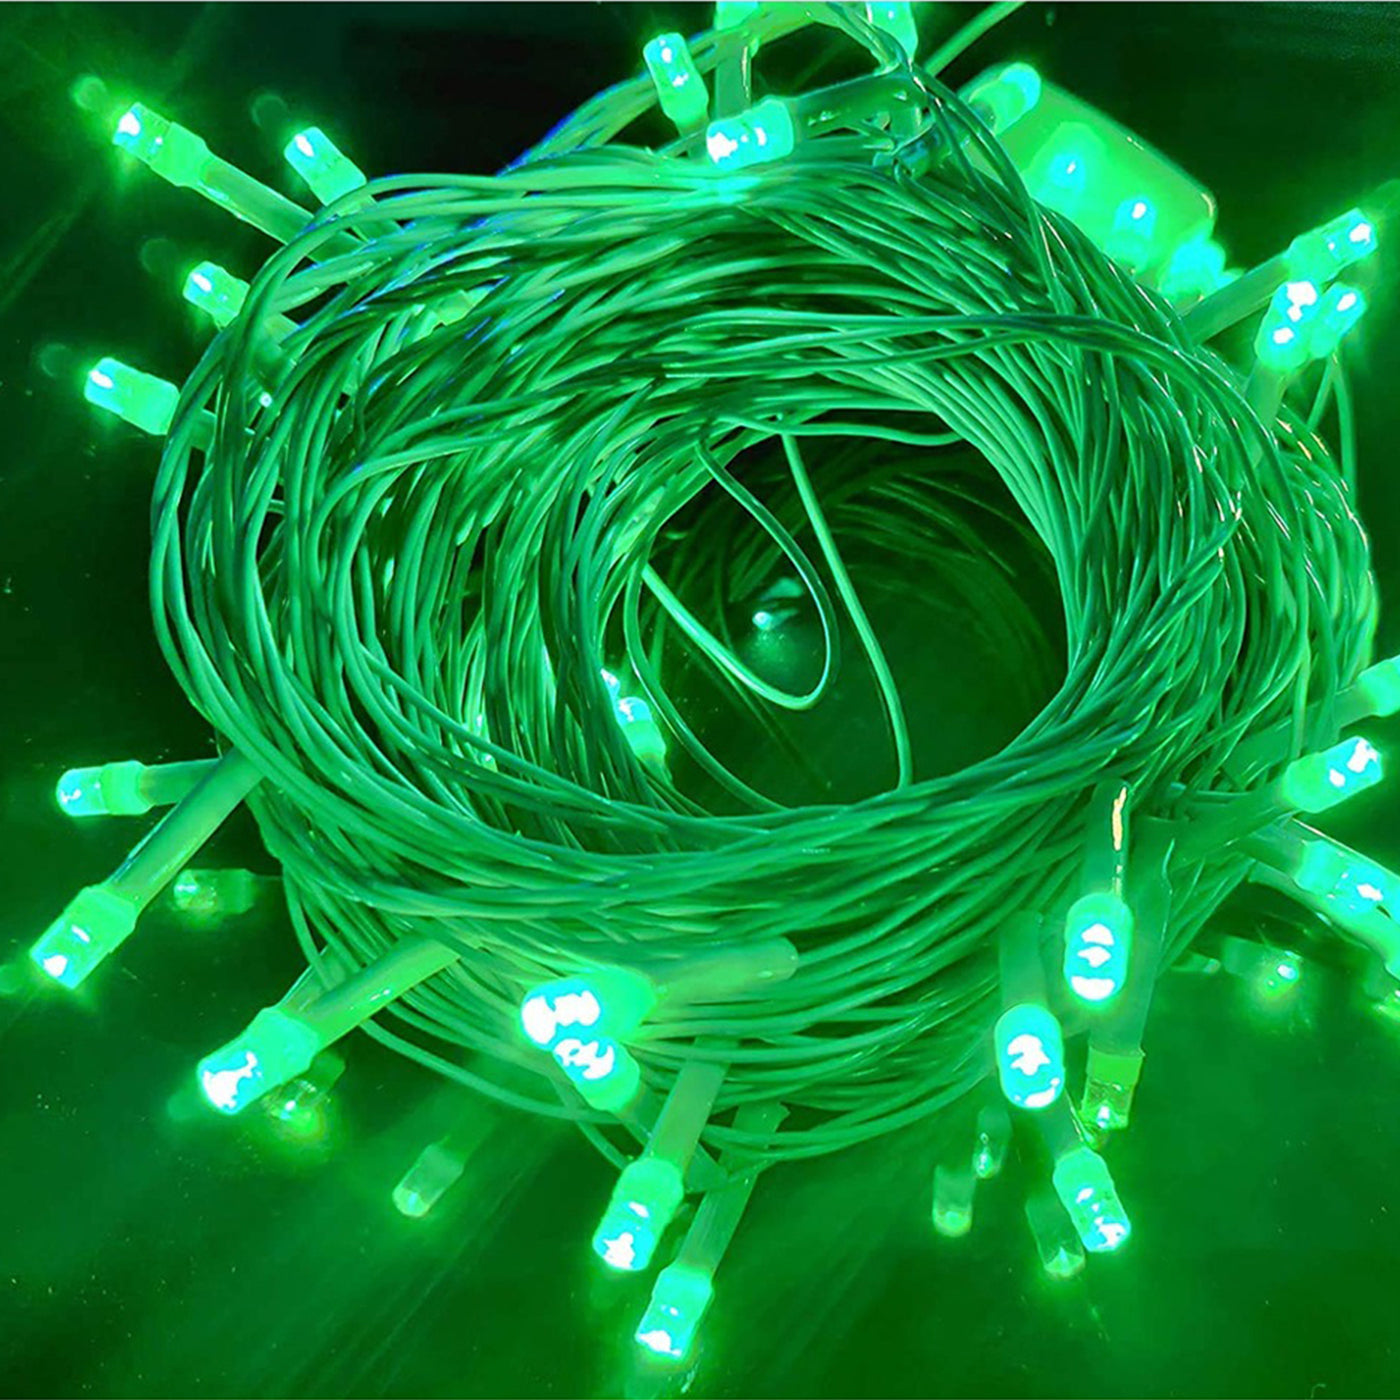 DecorTwist LED String Light for Home and Office Decor | Indoor & Outdoor Decorative Lights | Christmas | Diwali | Wedding | 15 Meter Length (Pack of 2) (Green)